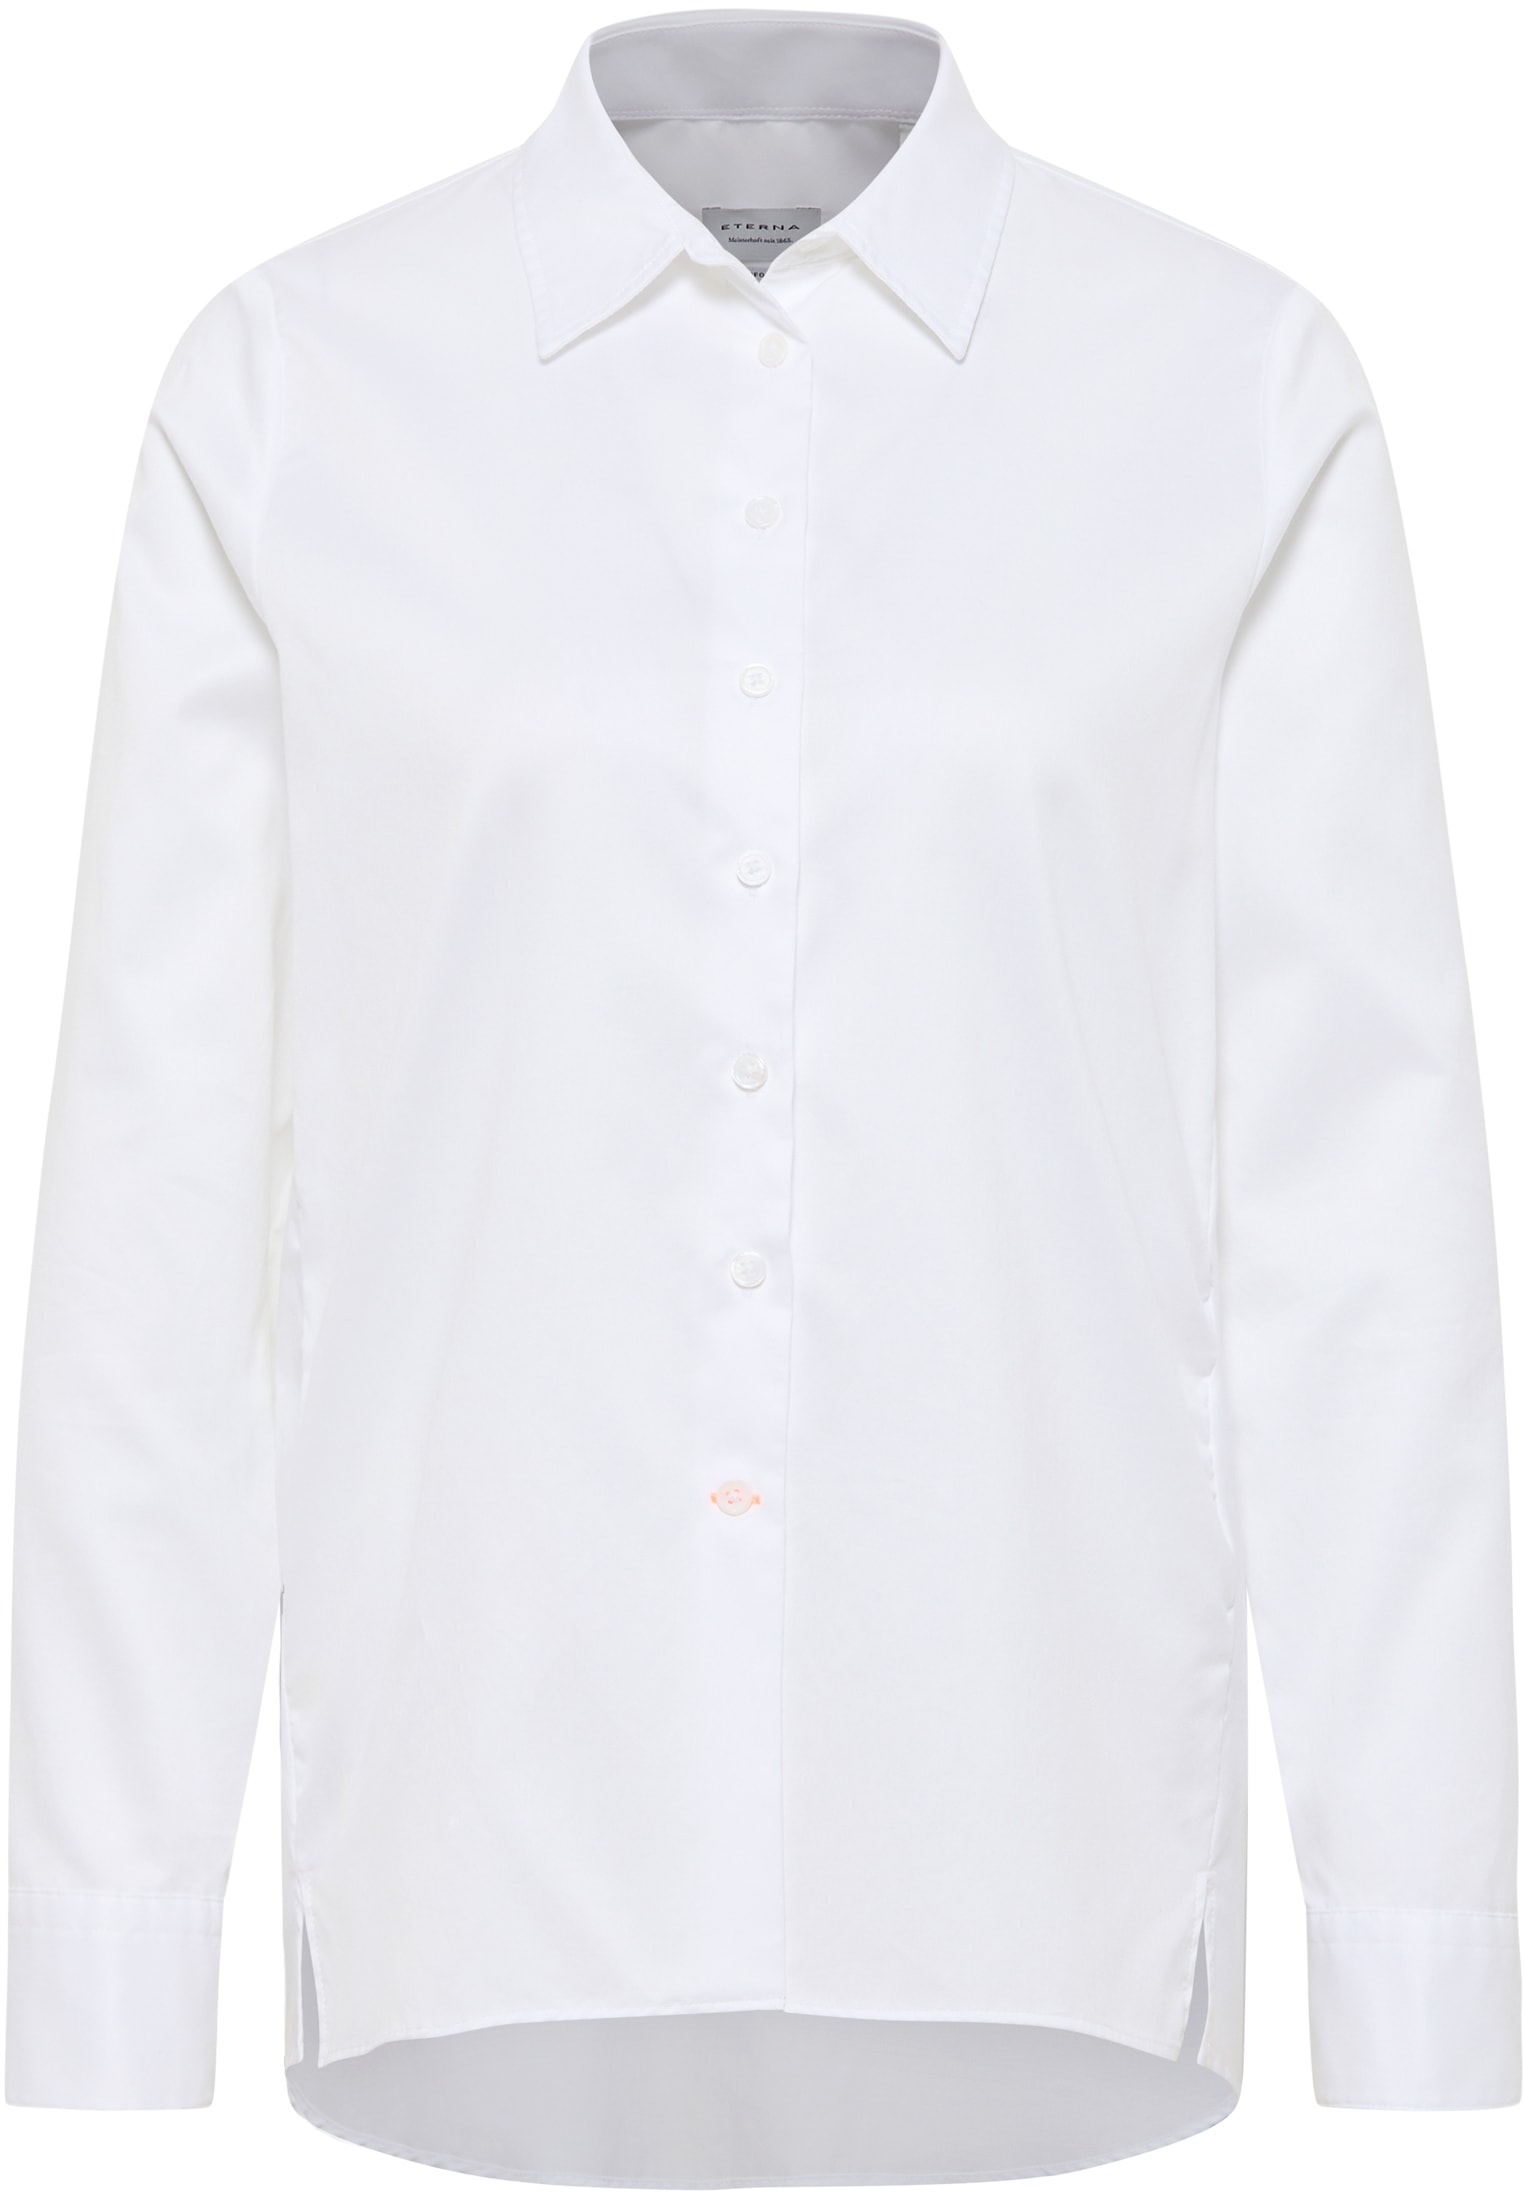 Soft Luxury Shirt Bluse in off-white unifarben | off-white | 34 | Langarm |  2BL00664-00-02-34-1/1